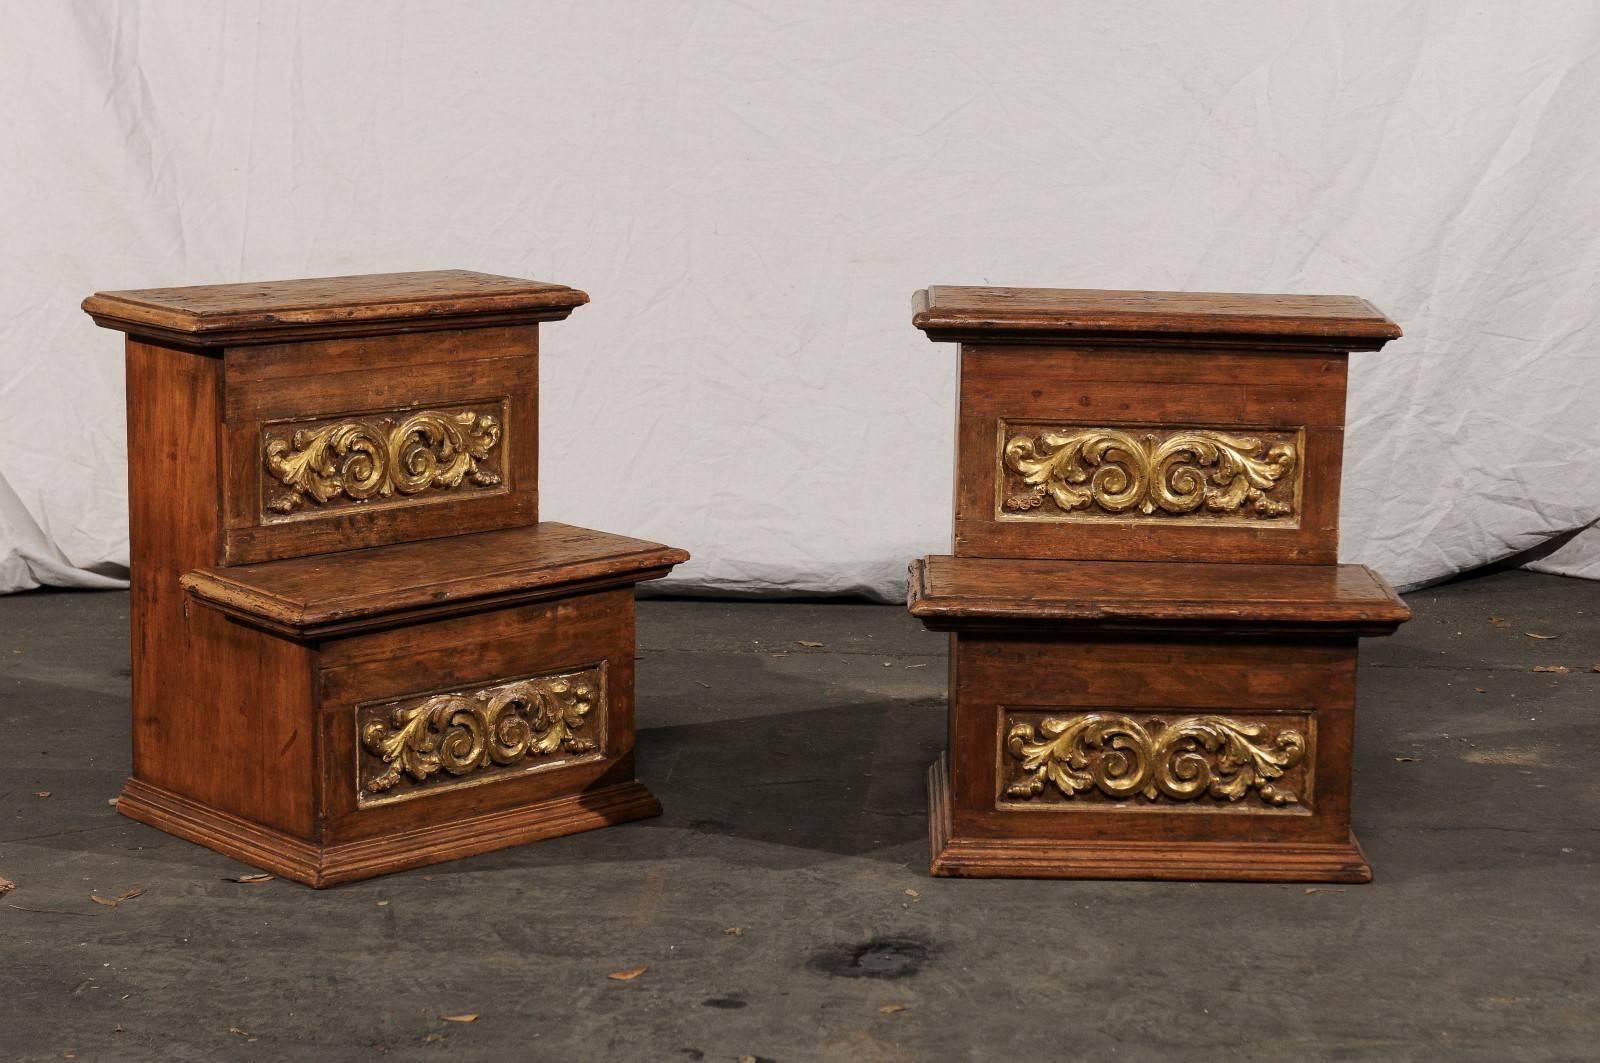 Pair of 18th-19th century Italian step tables with gilt and old elements.